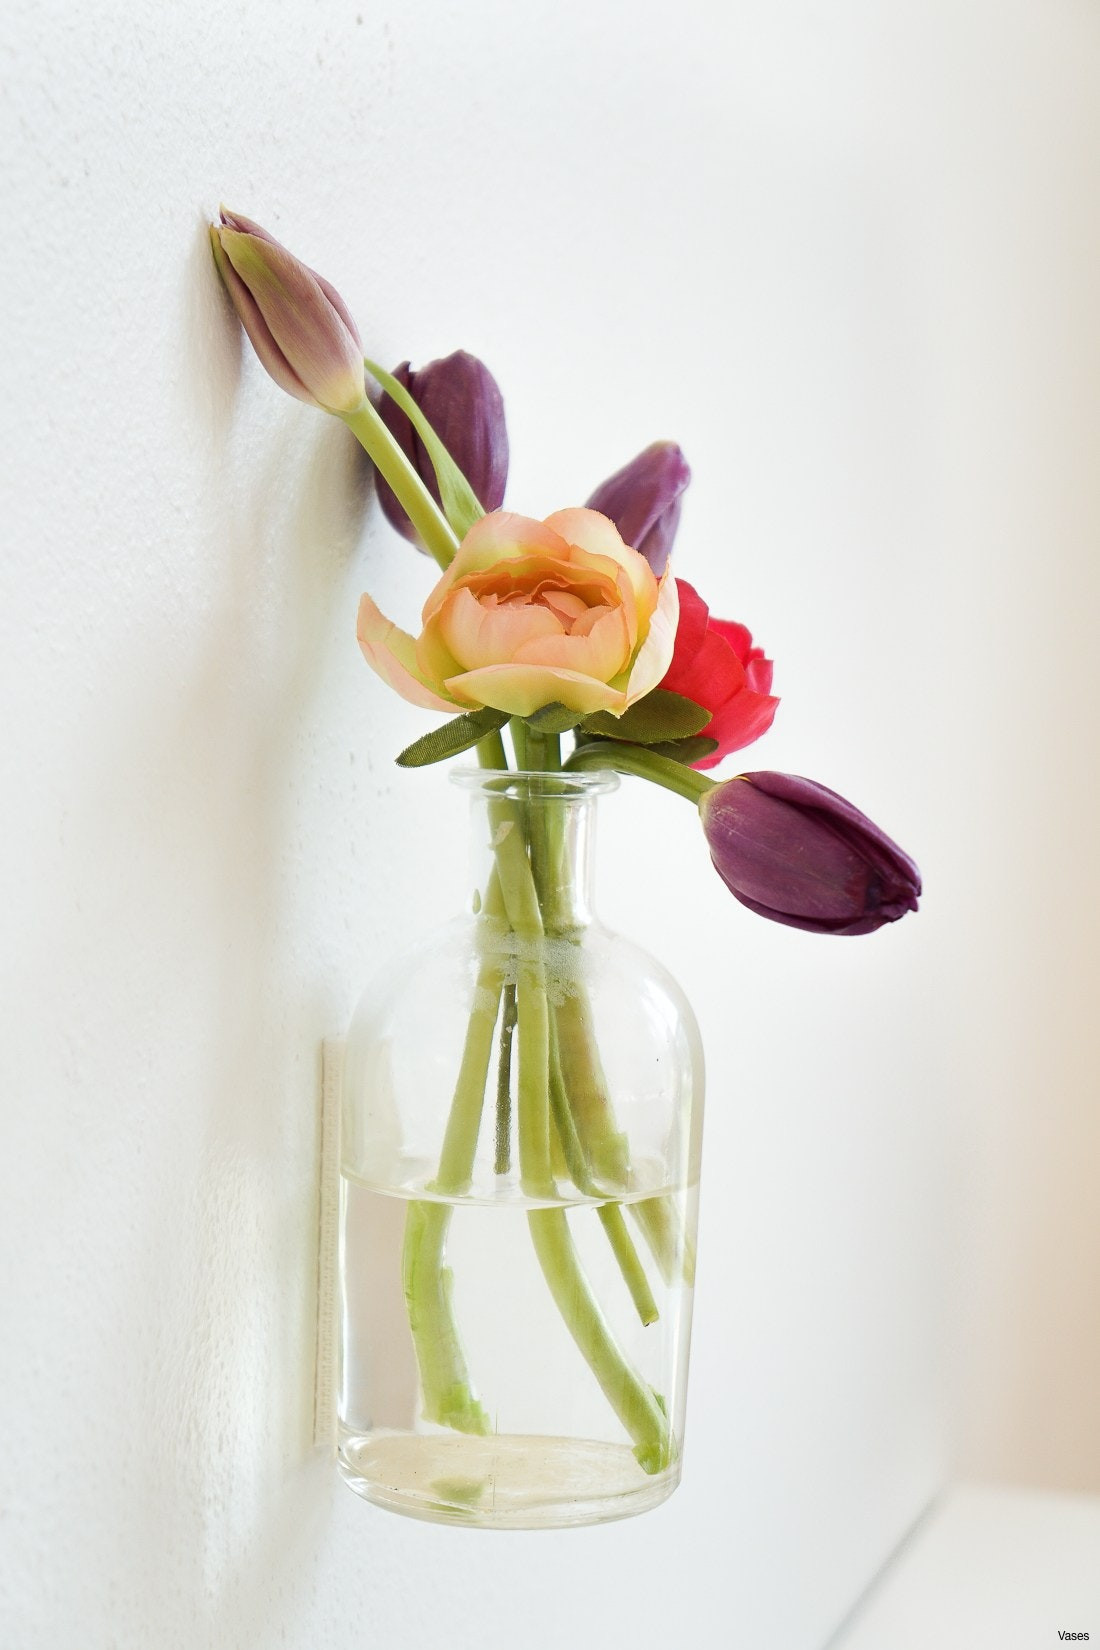 15 Unique Floating Flowers In Vase 2024 free download floating flowers in vase of flower wall vase pics il fullxfull l7e9h vases wall flower vase throughout flower wall vase pics il fullxfull l7e9h vases wall flower vase zoomi 0d decor inspirat